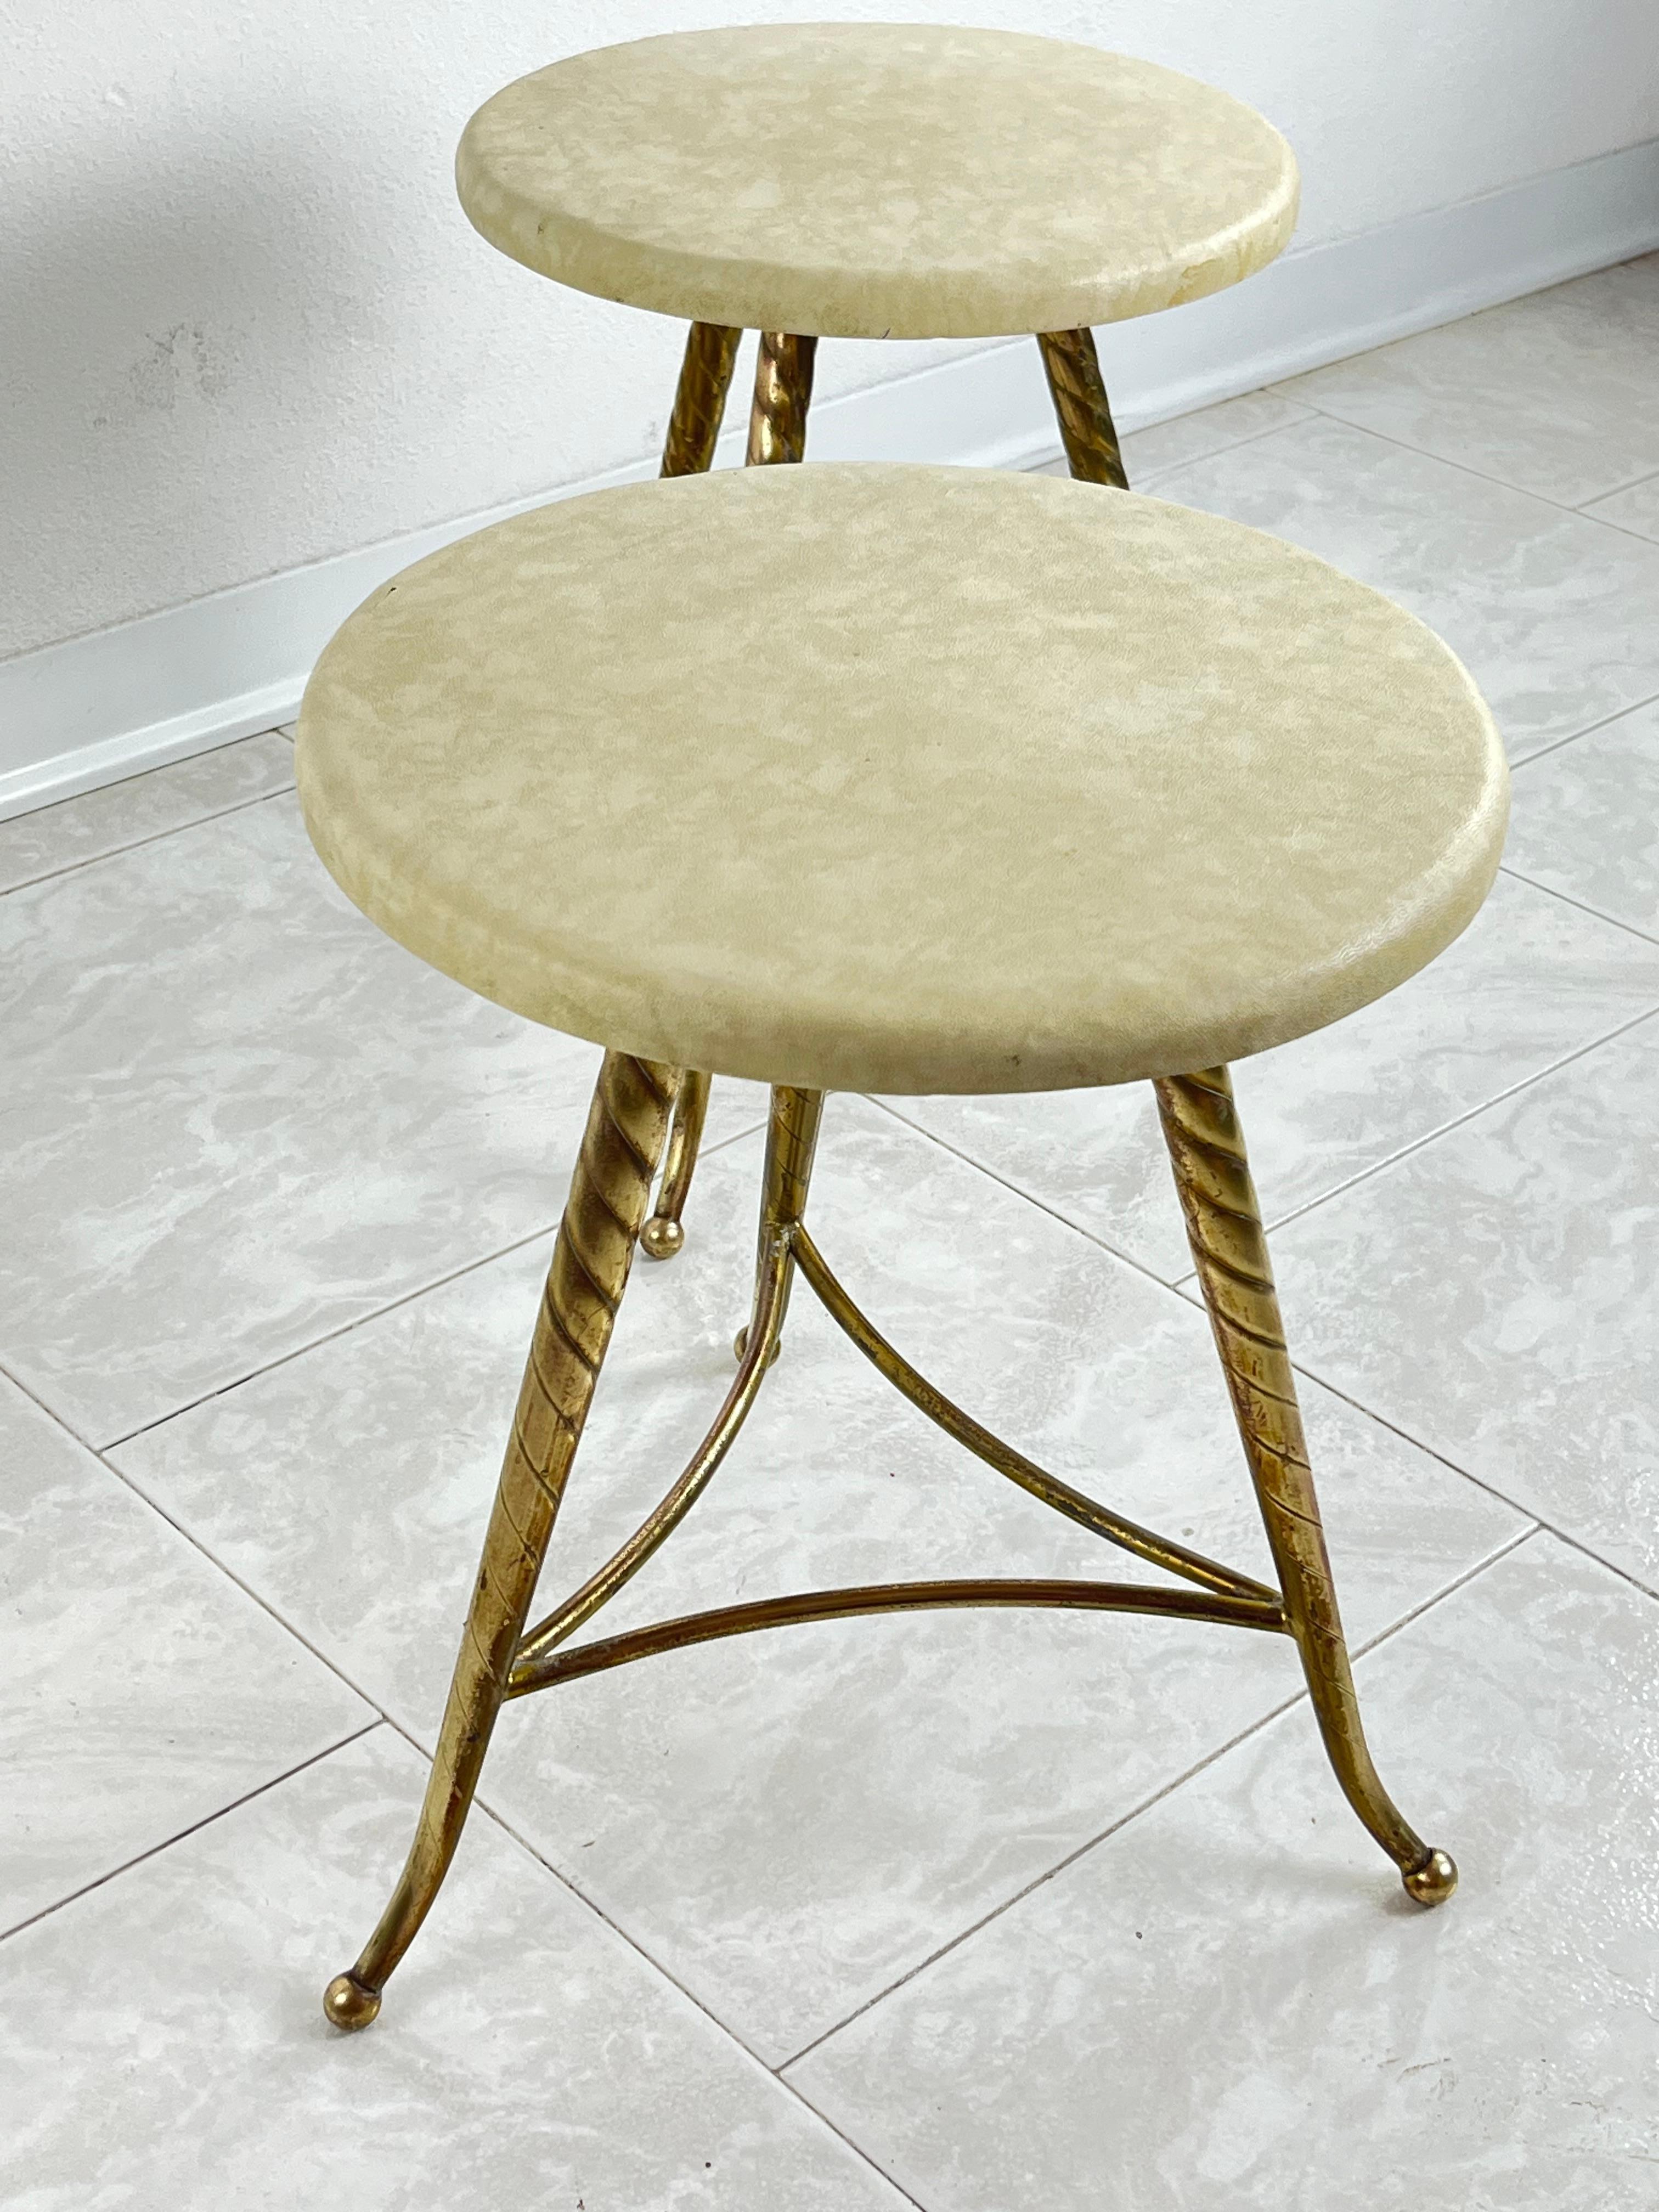 Set of 2 Mid-Century Brass Stools Attributed to Paolo Buffa 1950s For Sale 1